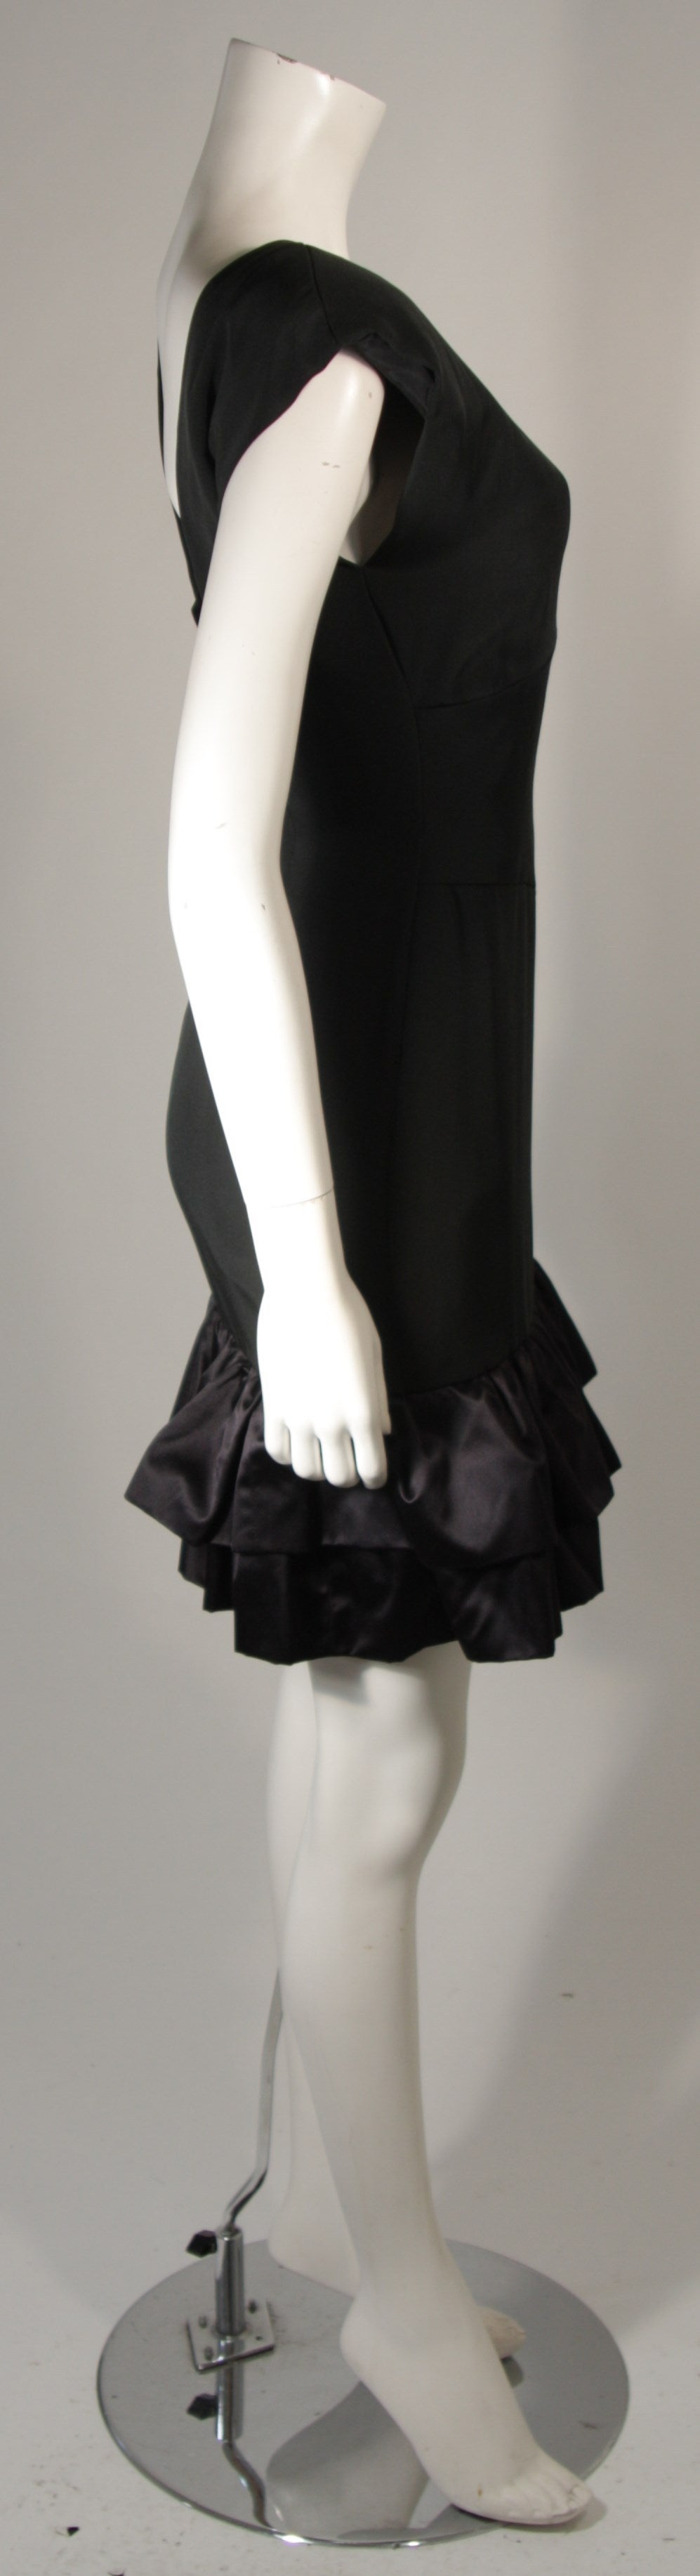 Vicky Tiel Black Silk Cocktail Dress with Criss Cross Back Size Small 1